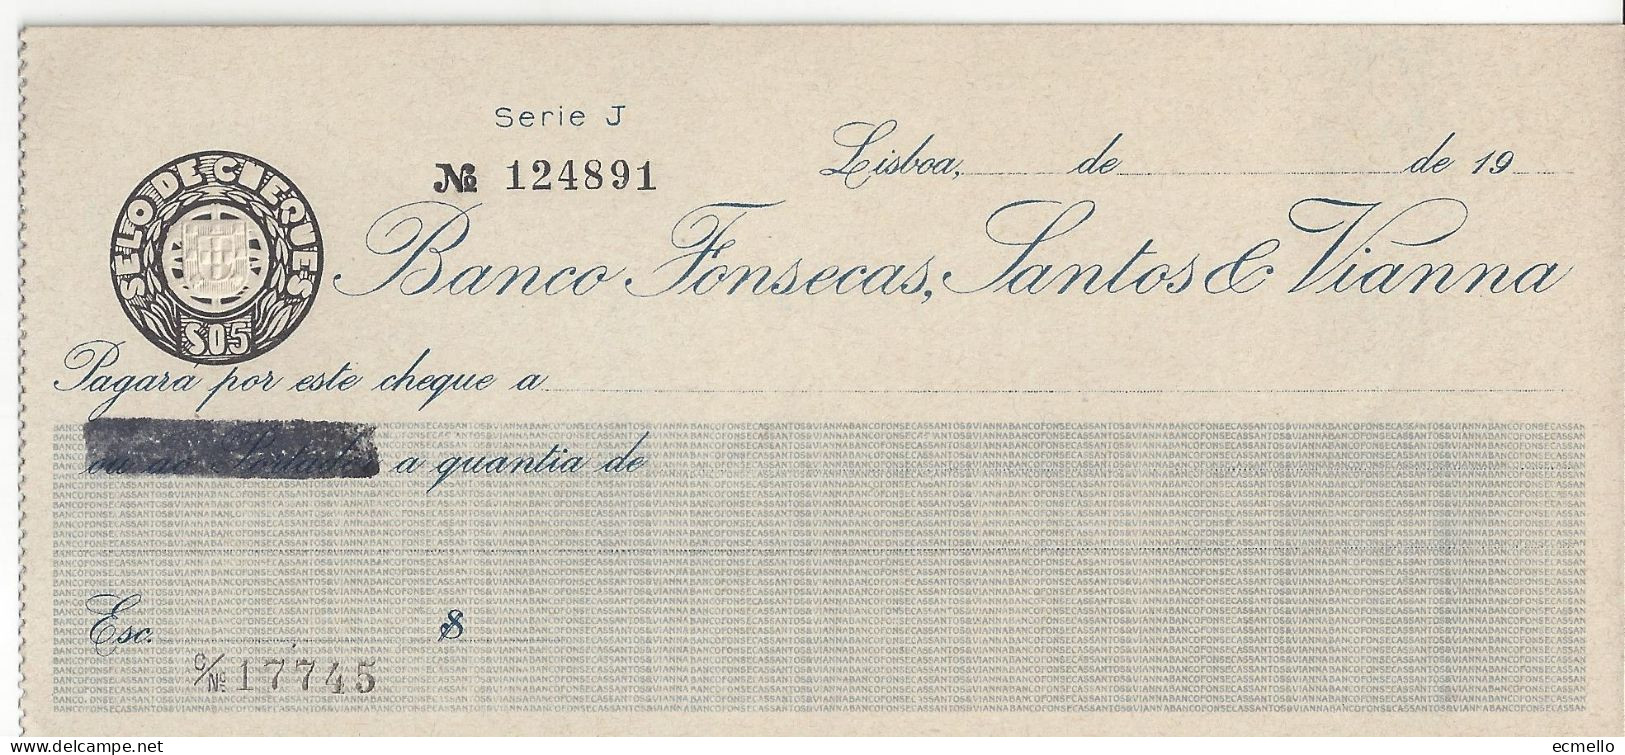 PORTUGAL CHEQUE CHECK BANCO FONSECAS, SANTOS & VIANNA, 1950'S. - Cheques & Traveler's Cheques